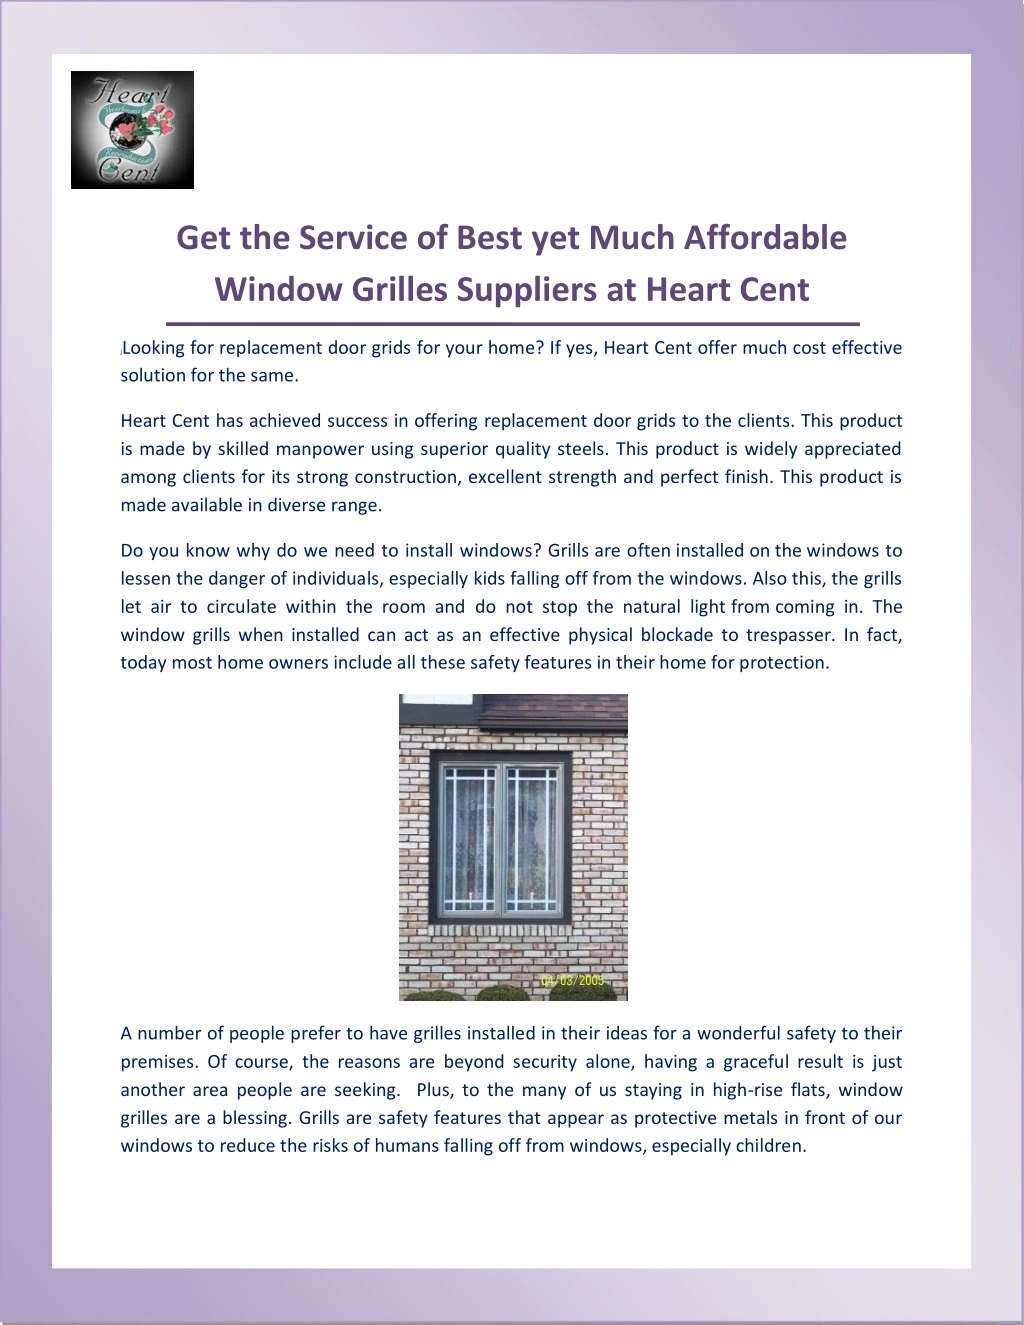 get the service of best yet much affordable